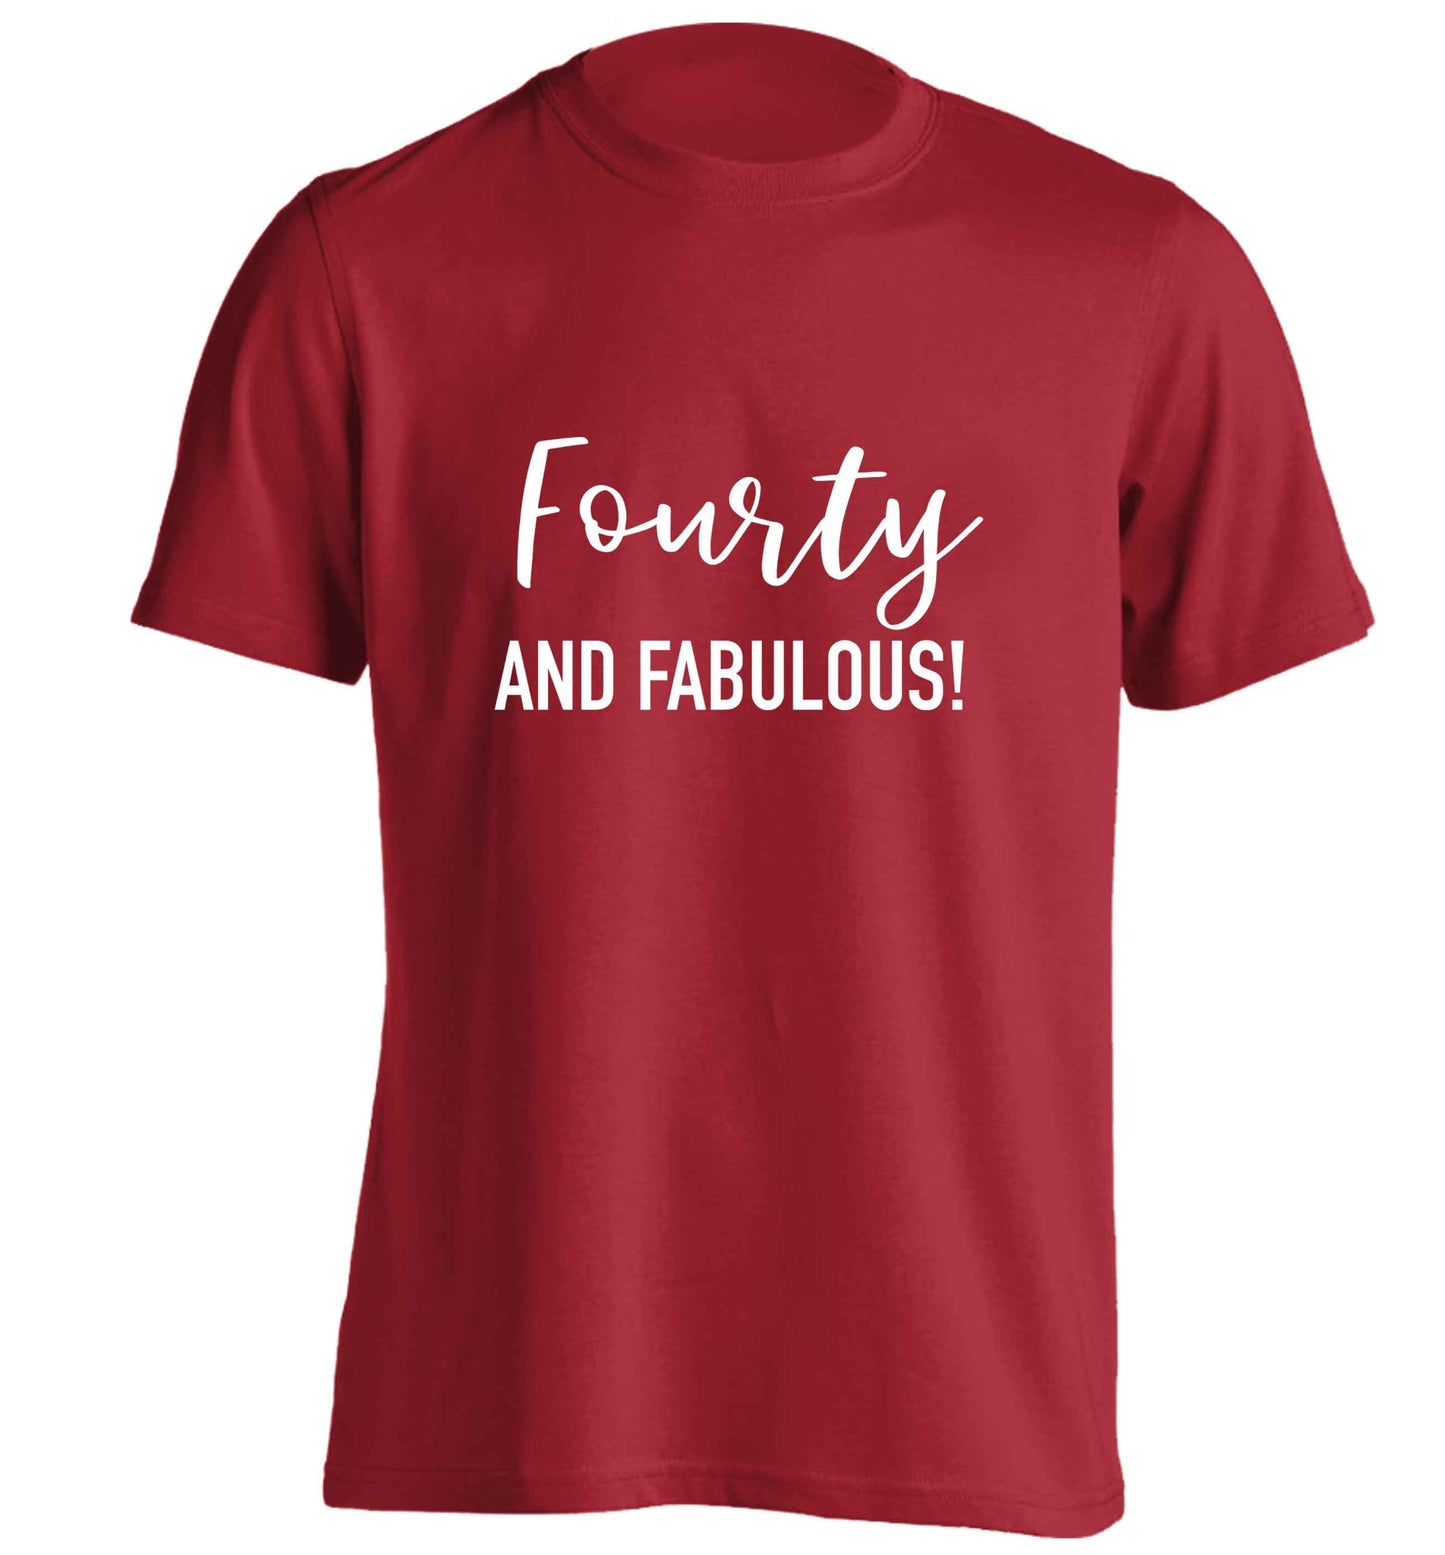 Fourty and fabulous adults unisex red Tshirt 2XL